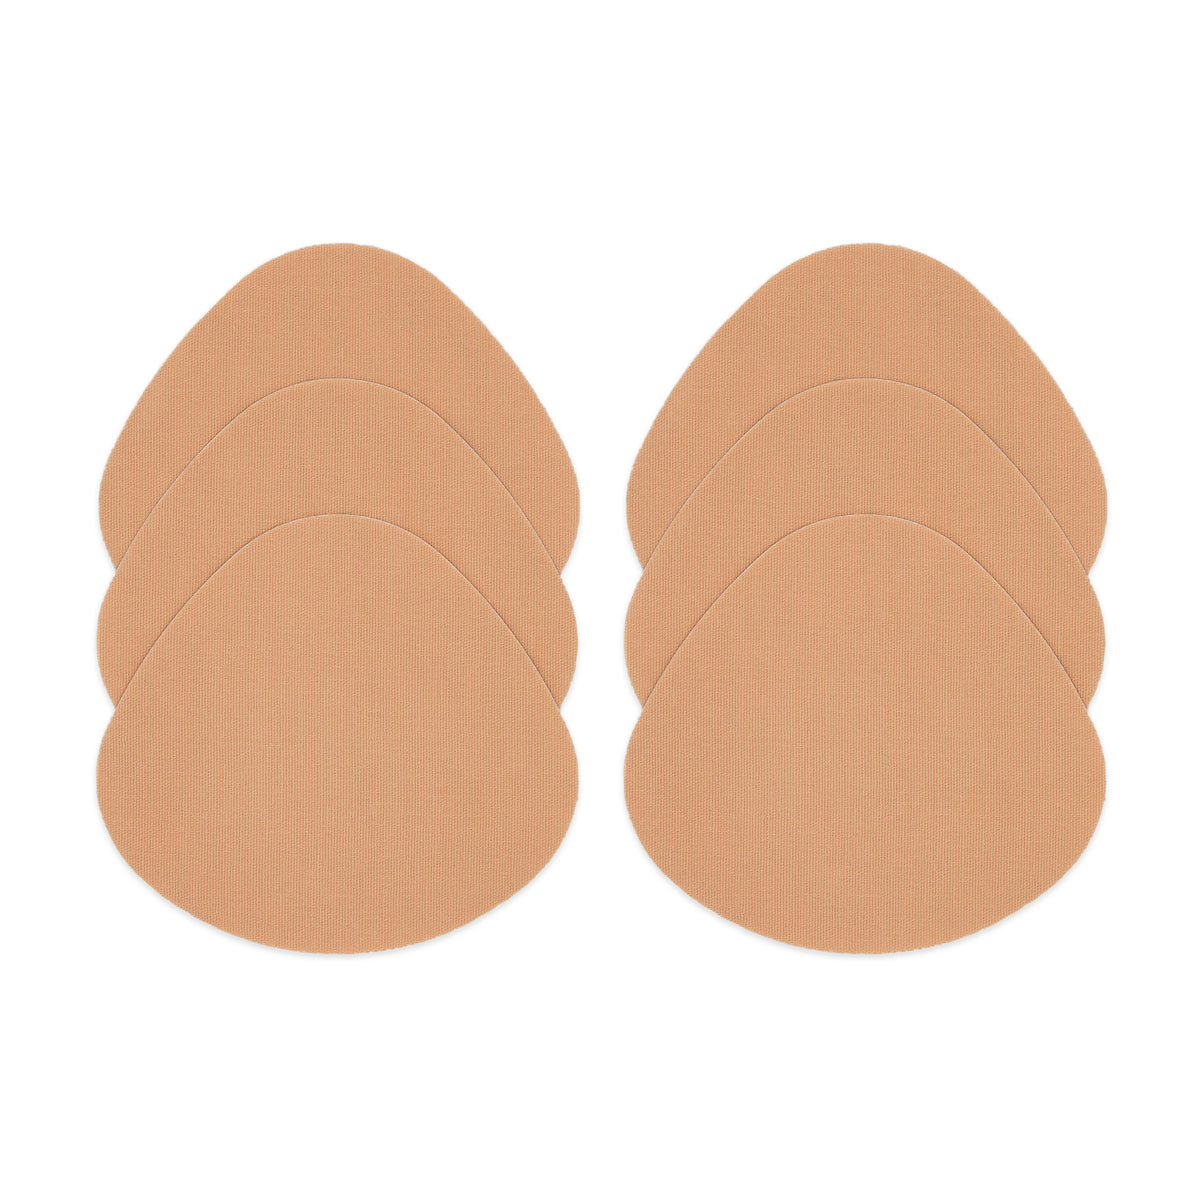 Boob tape breast lift tape helps big breasts lift up and support - comes  with two nipple covers, Boobtape lift for any type of clothing and A-E cup